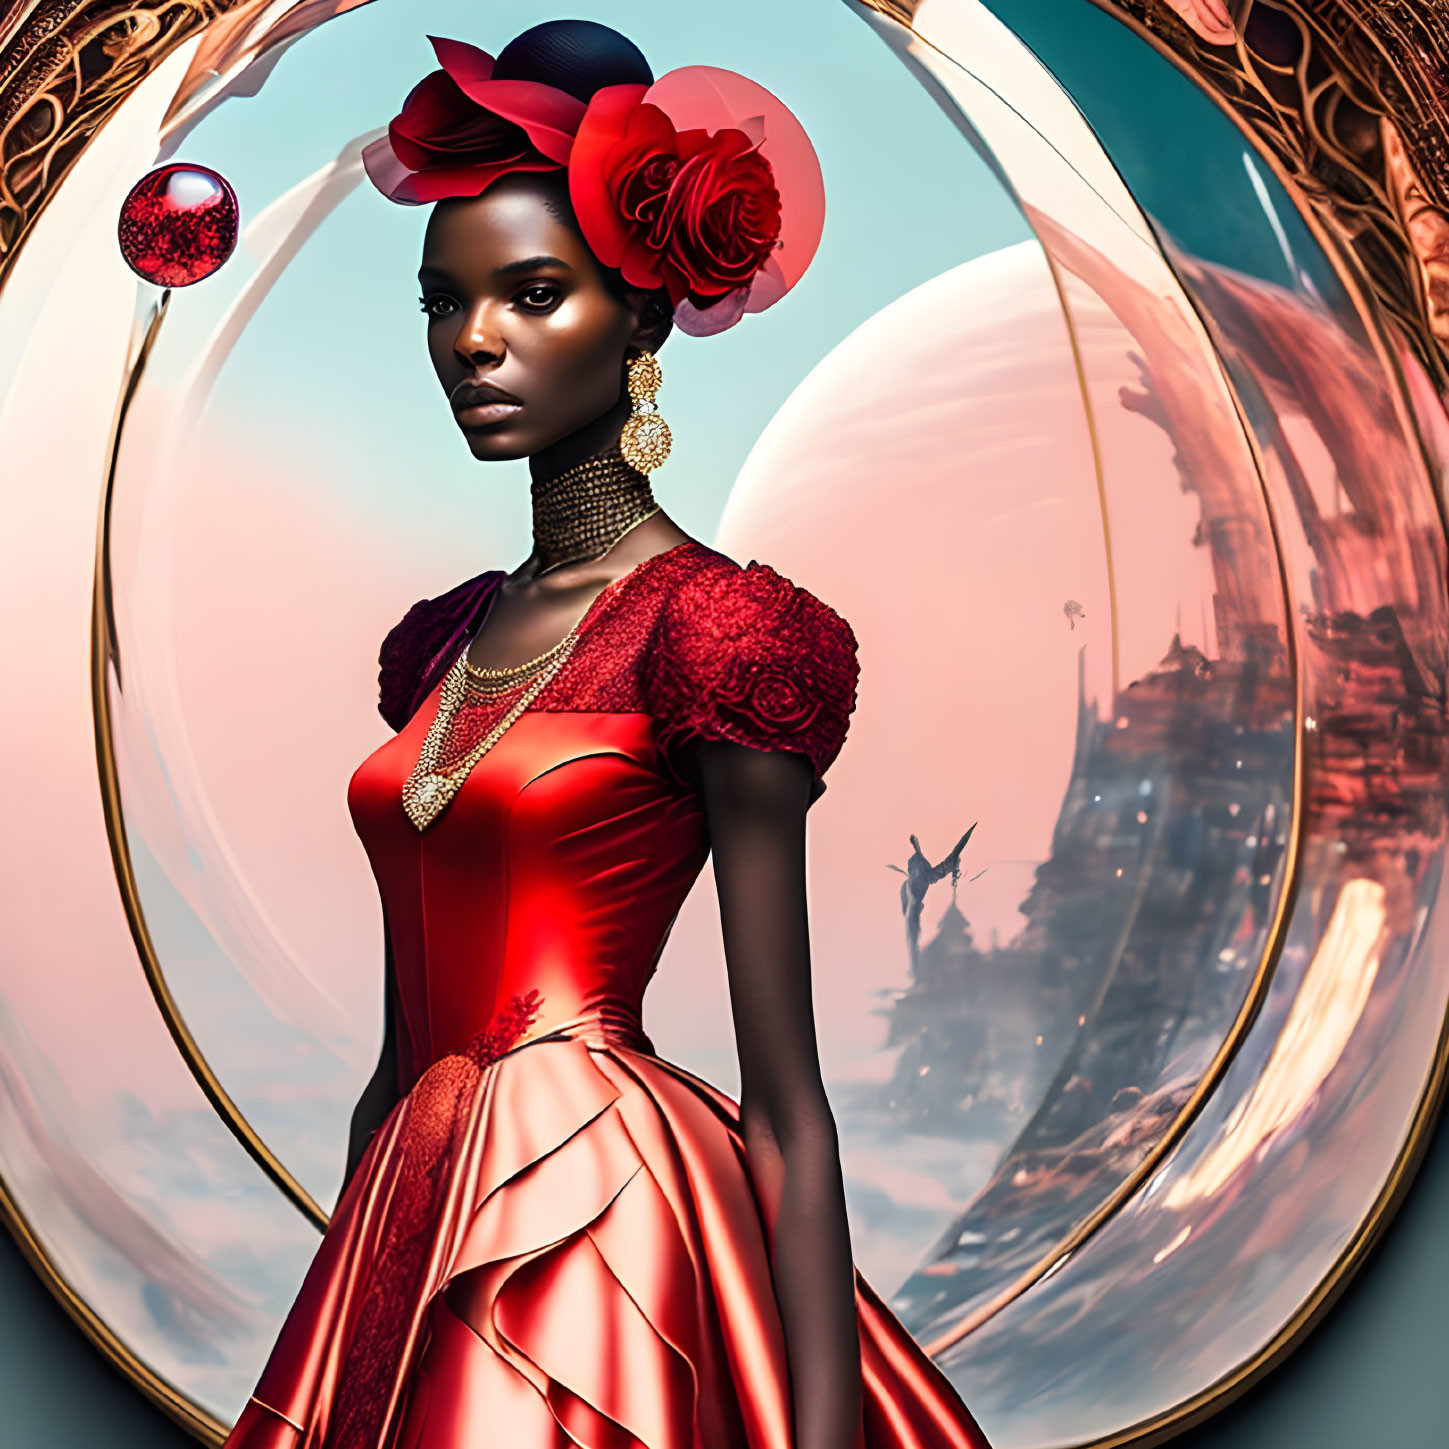 Stylish woman in red dress and hat with roses, gold jewelry, in fantastical setting